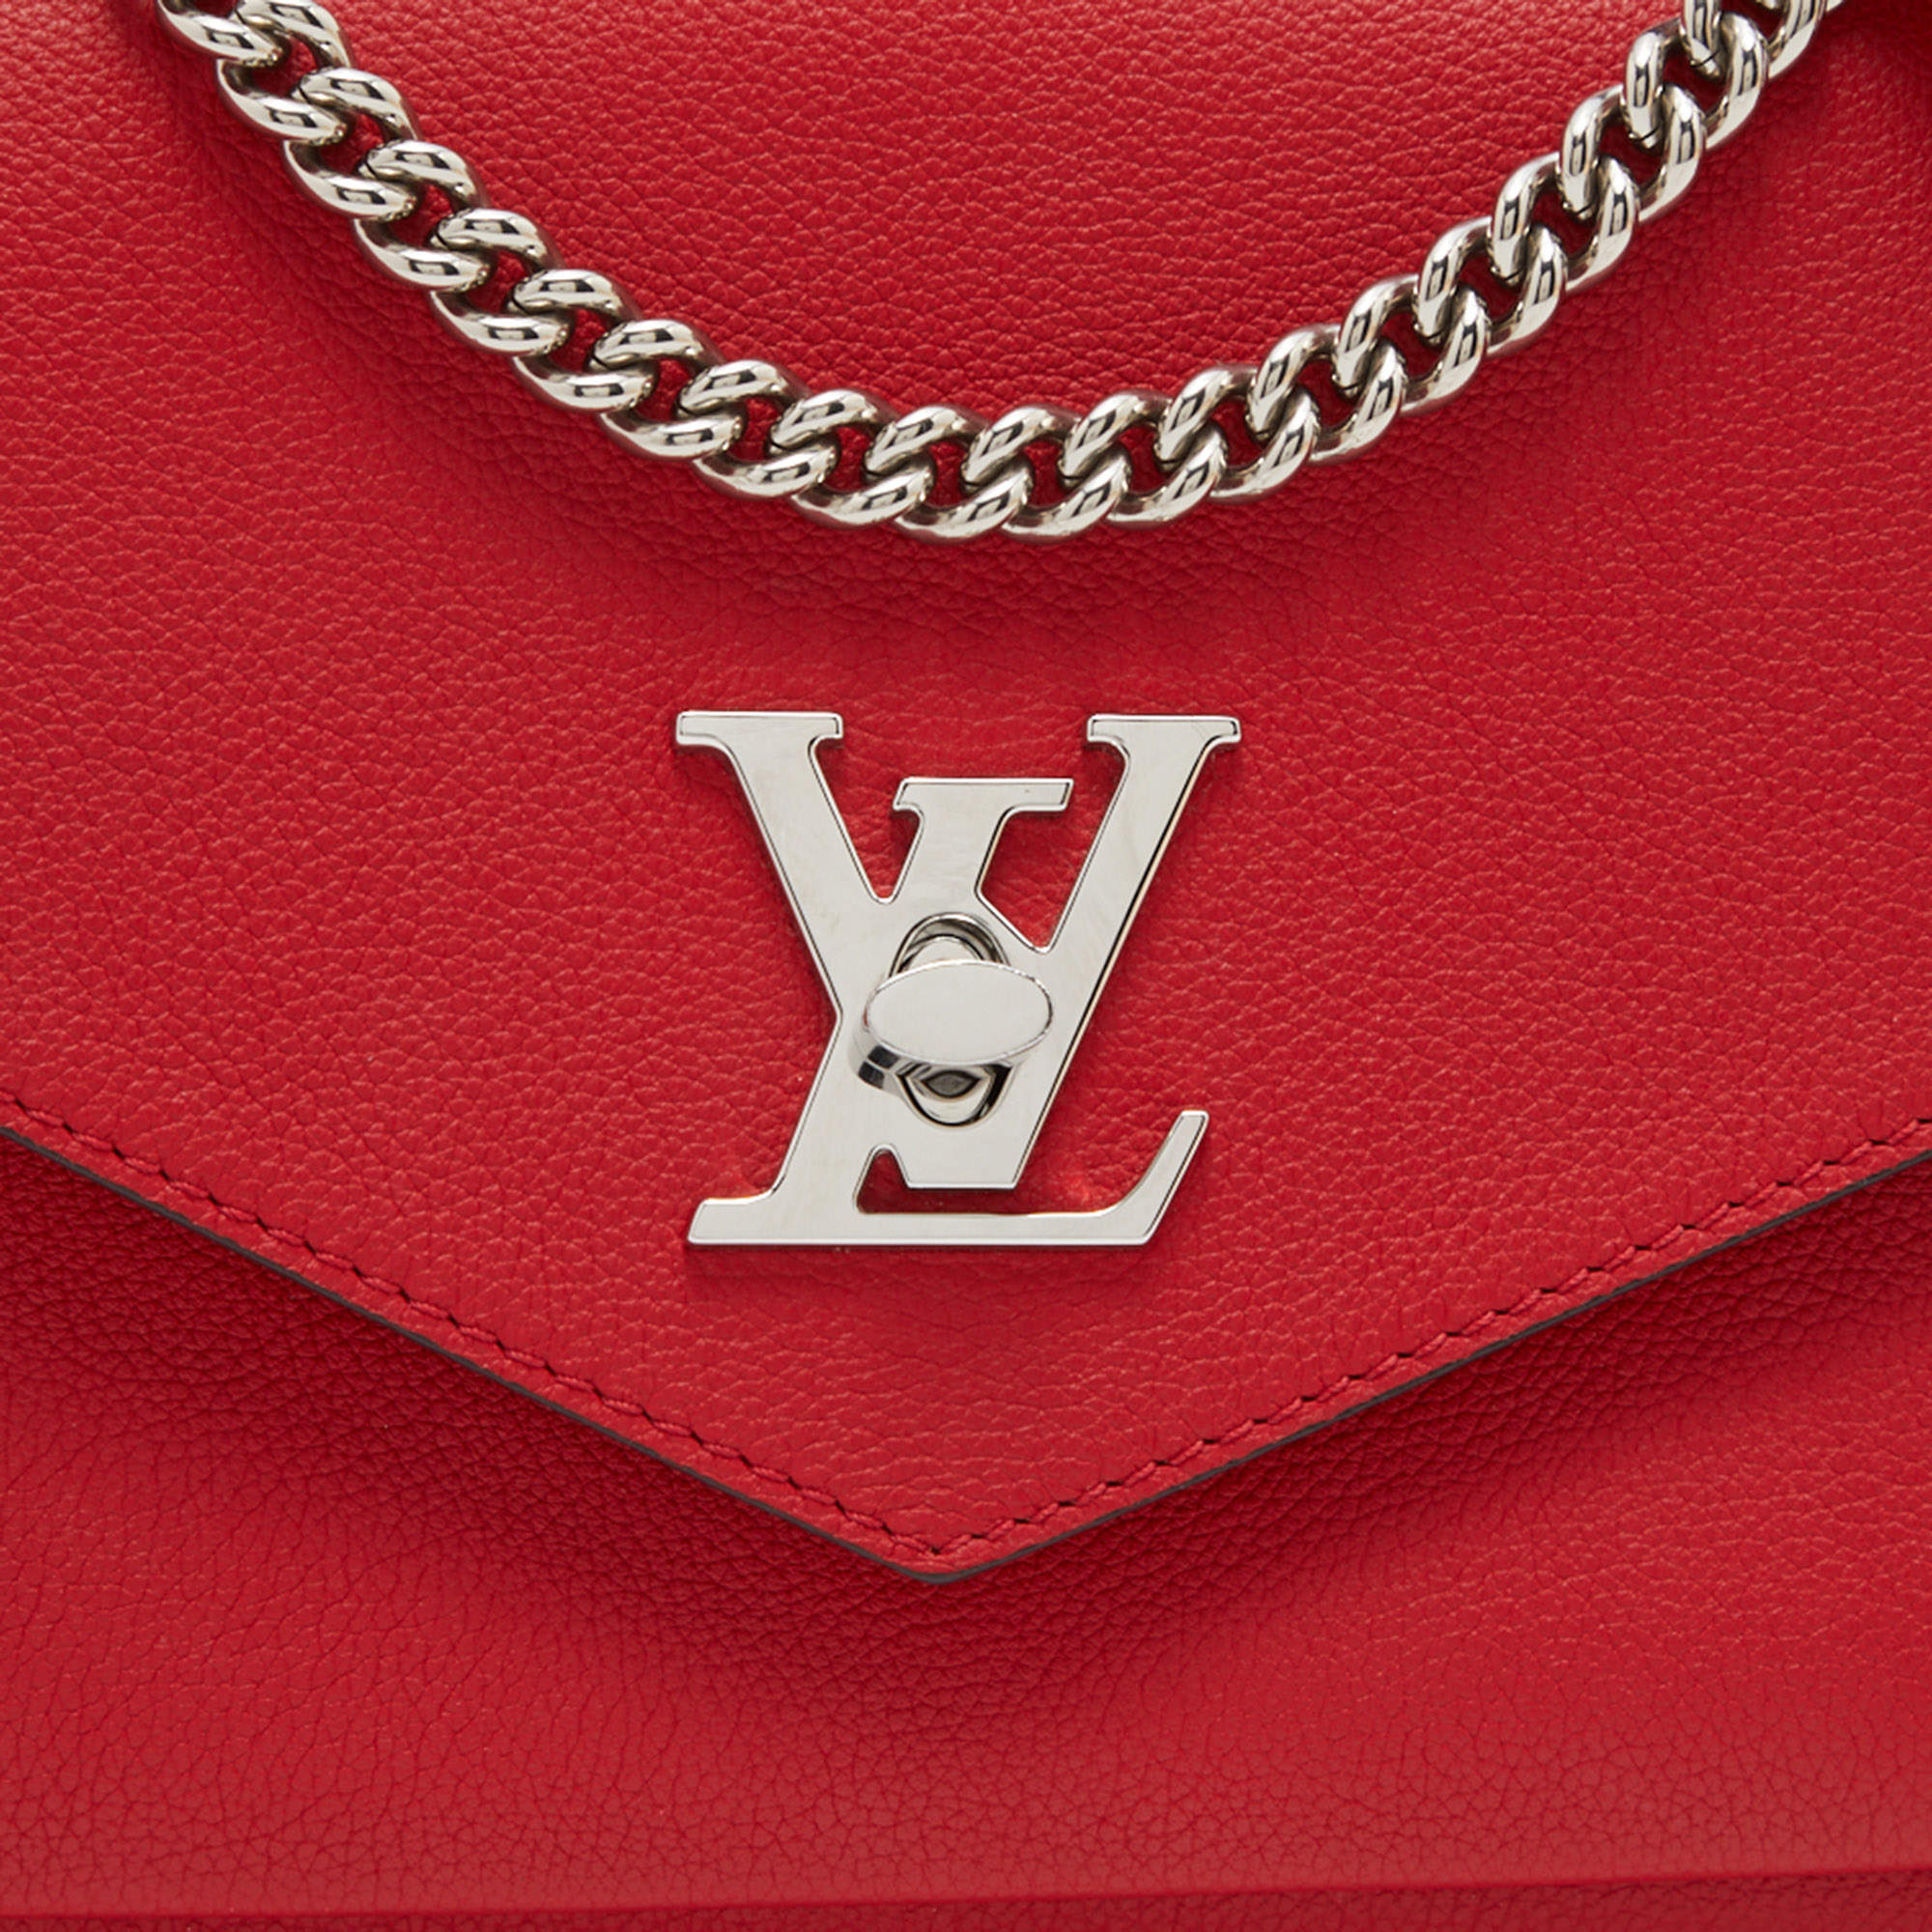 LOUIS VUITTON Lock Me Red Backpack – The Luxury Lady